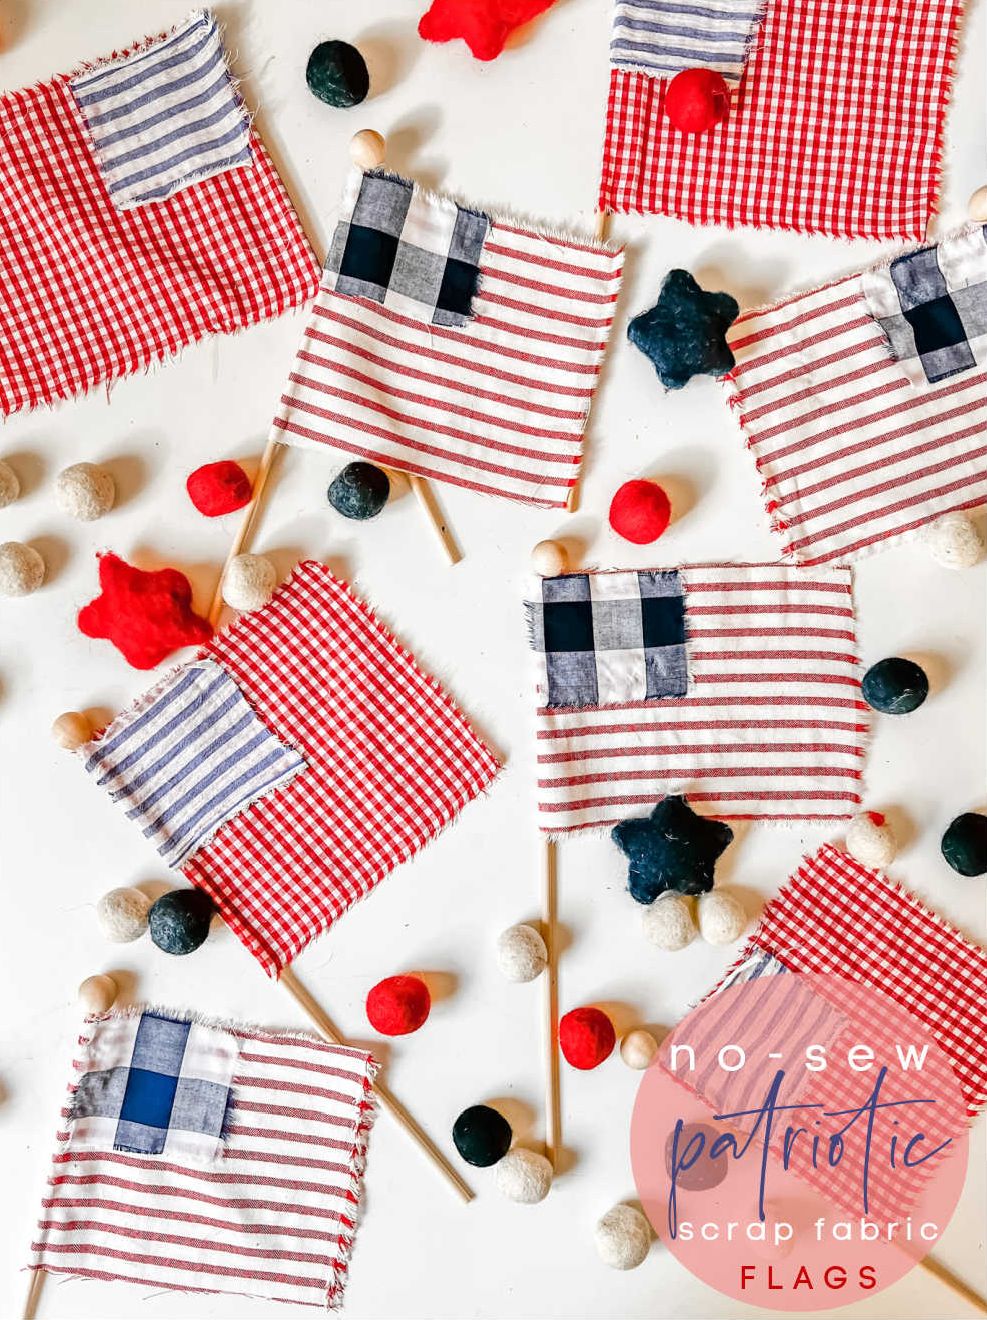 DIY No-Sew Patriotic Scrap Fabric Flags - Best DIY 4th of July Decorations - The NavagePatch.com